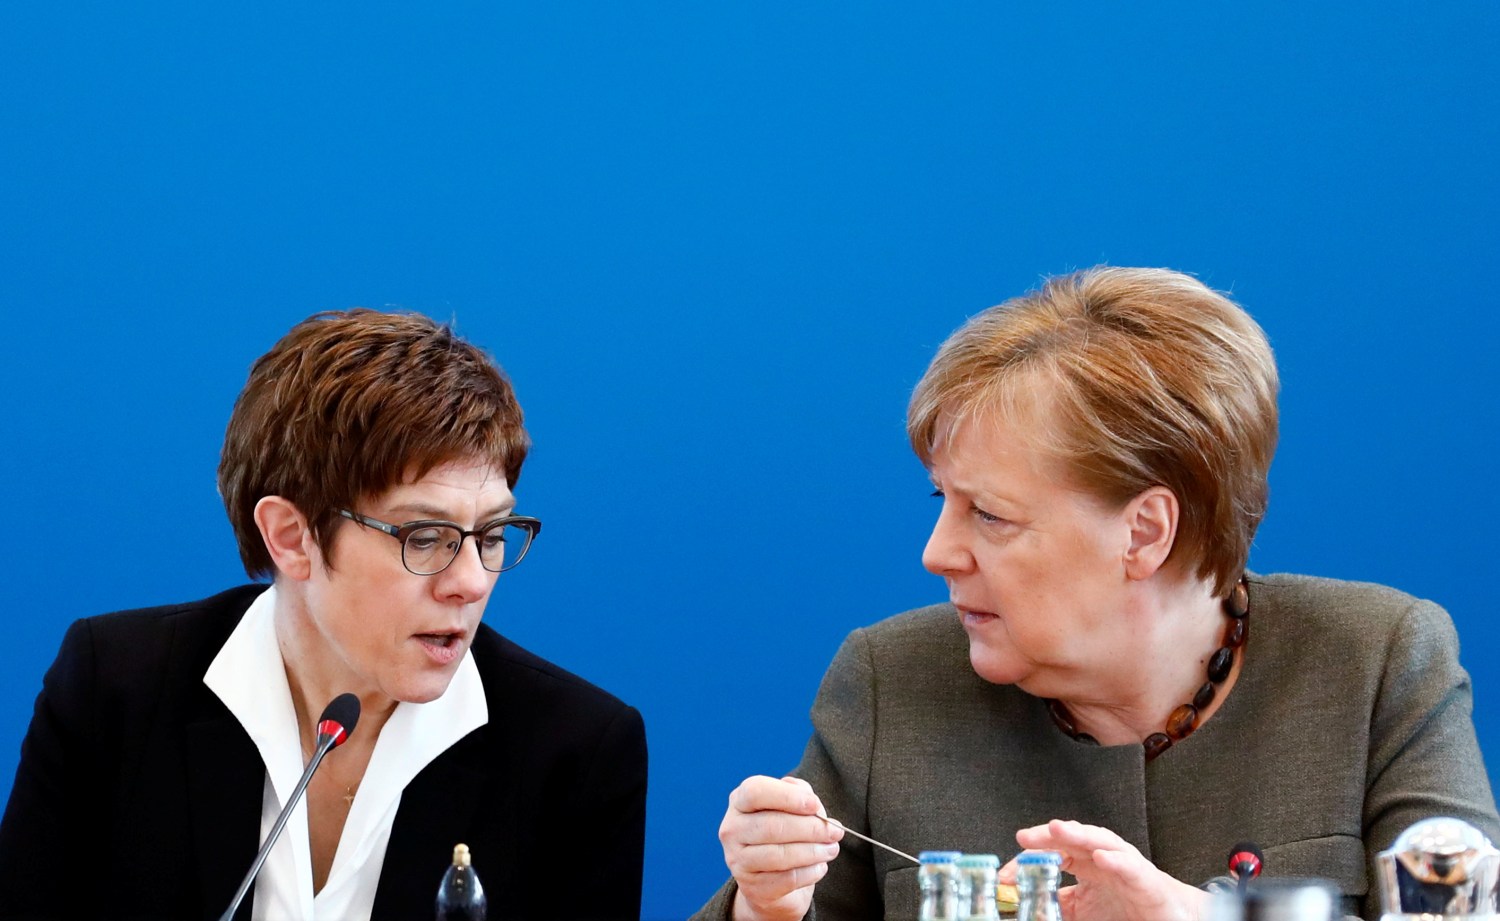 German Chancellor Angela Merkel and German Defense Minister Annegret Kramp-Karrenbauer speak during a CDU board meeting at the party's headquarters in Berlin, Germany, February 24, 2020. REUTERS/Michele Tantussi